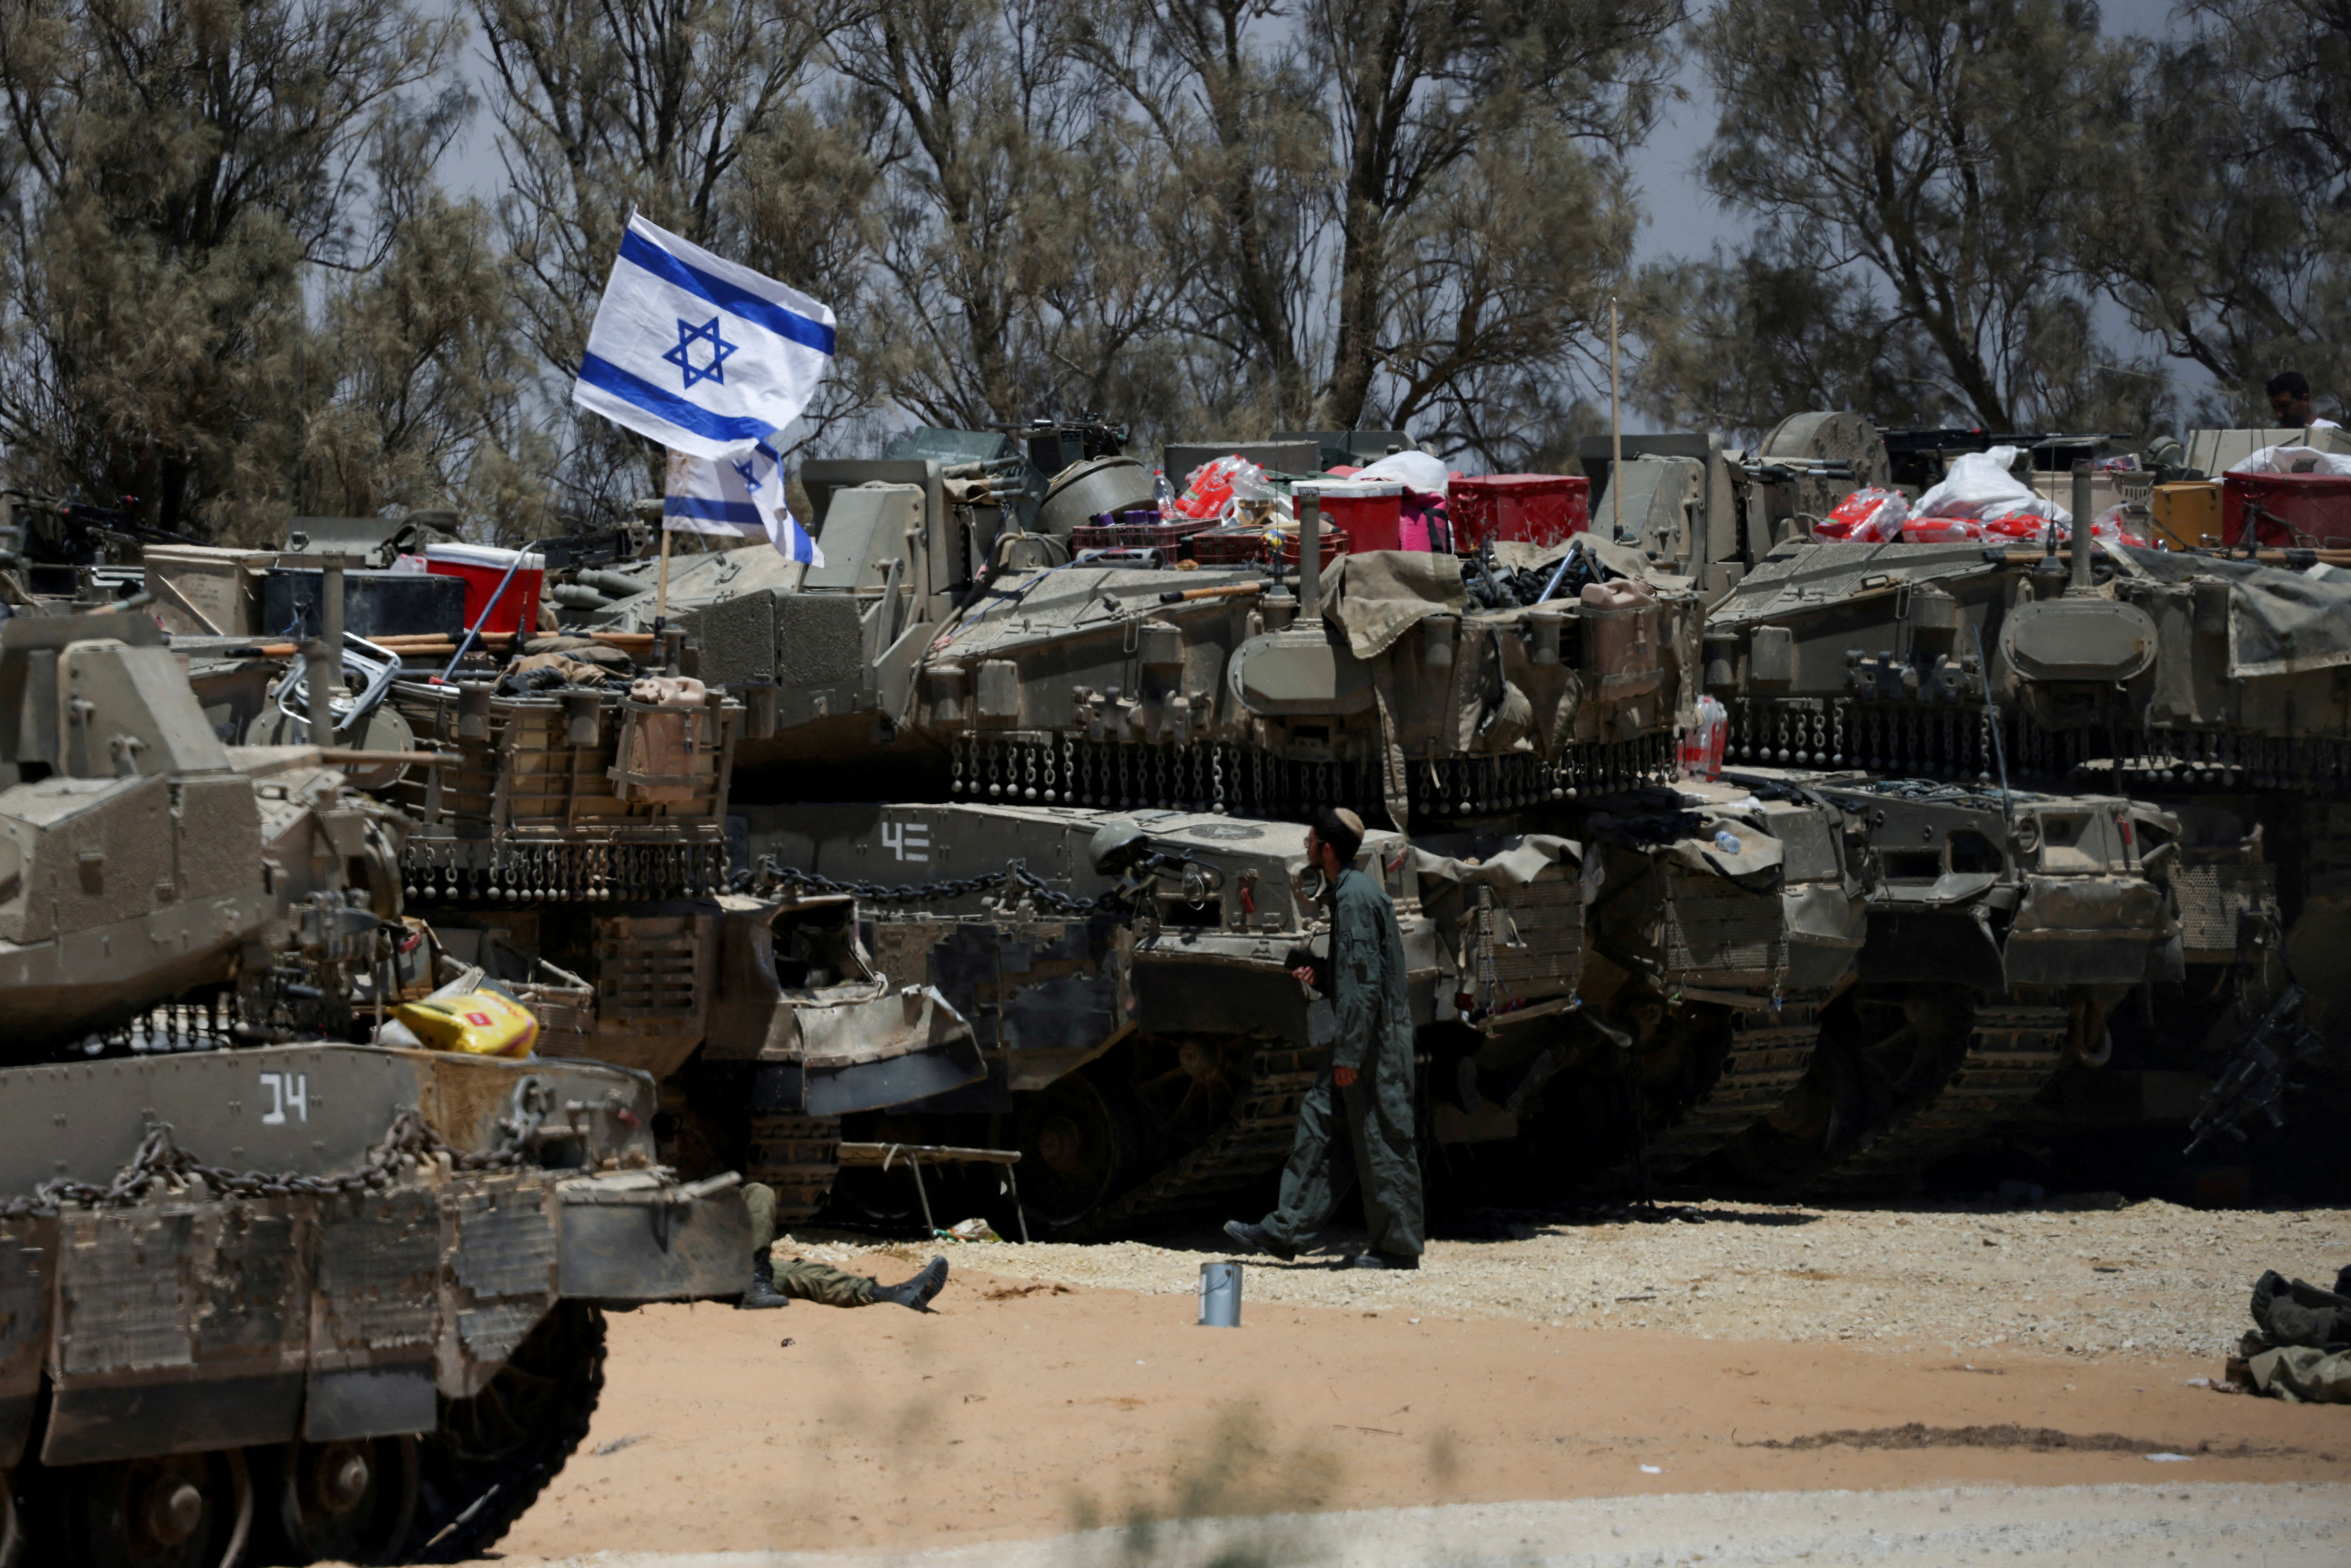 An Israeli soldier walks near military vehicles, amid the ongoing conflict between Israel and the Palestinian Islamist group Hamas, near Israel's border with Gaza in southern Israel